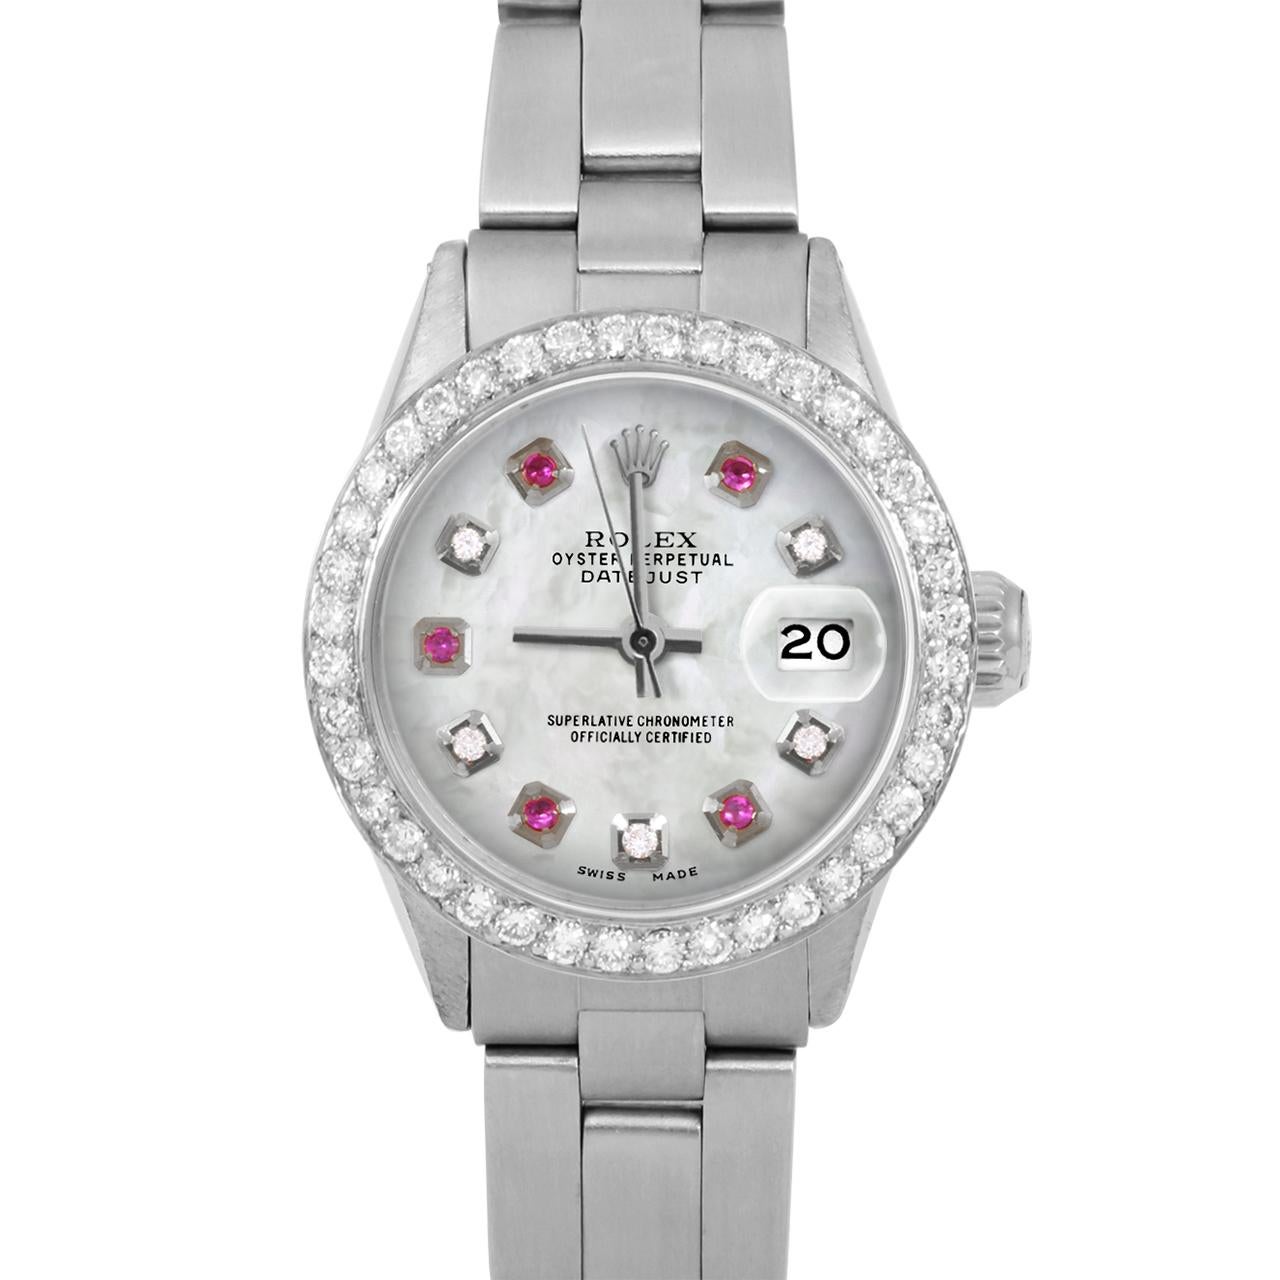 Brand : Rolex
Model : Datejust (Non-Quickset Model)
Gender : Ladies
Metals : Stainless Steel
Case Size : 24 mm

Dial : Custom Mother Of Pearl Diamond Ruby Dial (This dial is not original Rolex And has been added aftermarket yet is a beautiful Custom